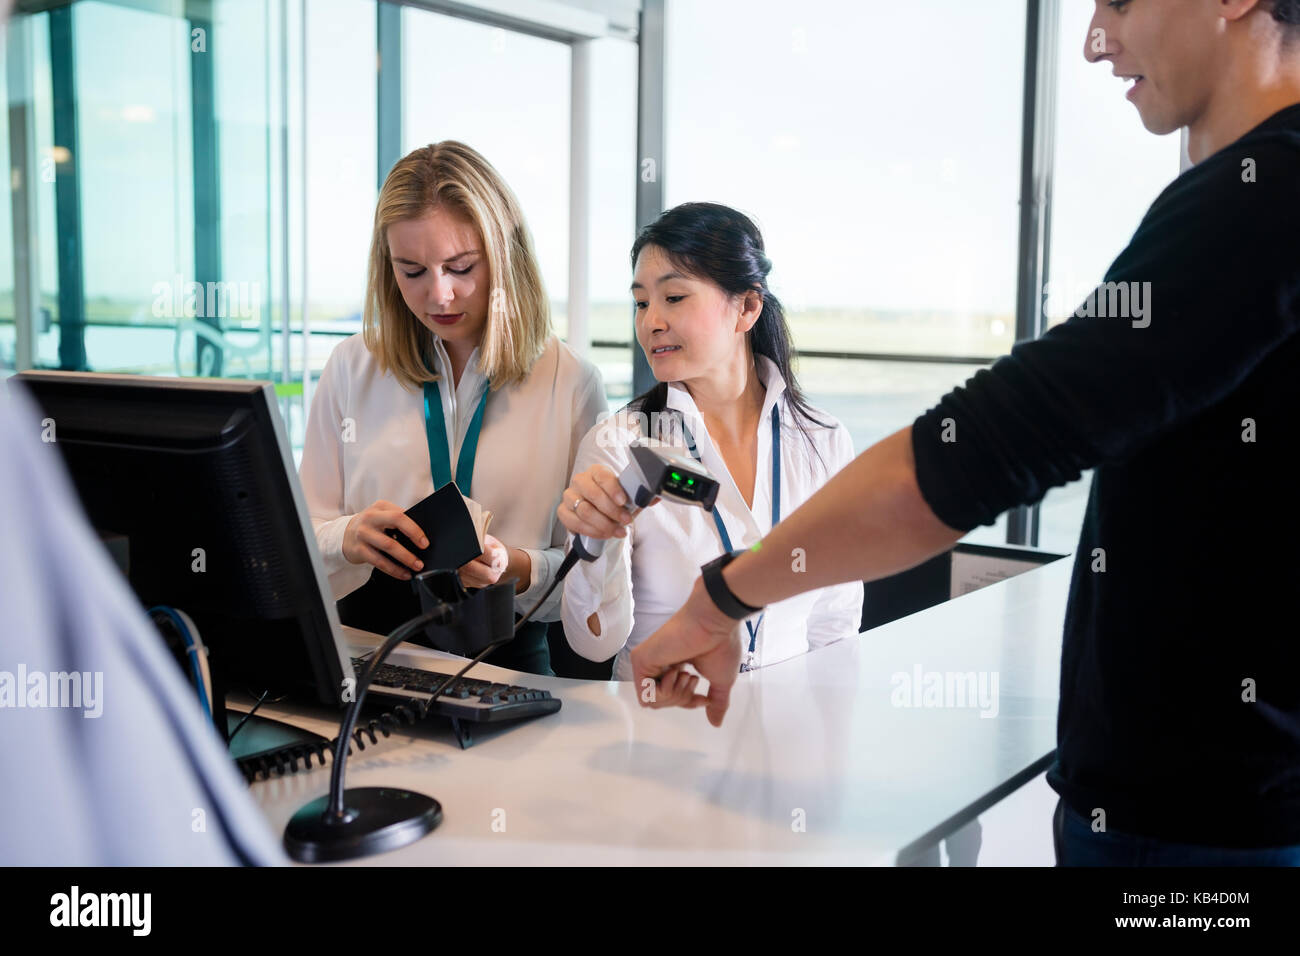 Mid adult receptionist scanning passengers smart watch while colleague checking passport at counter in airport Stock Photo